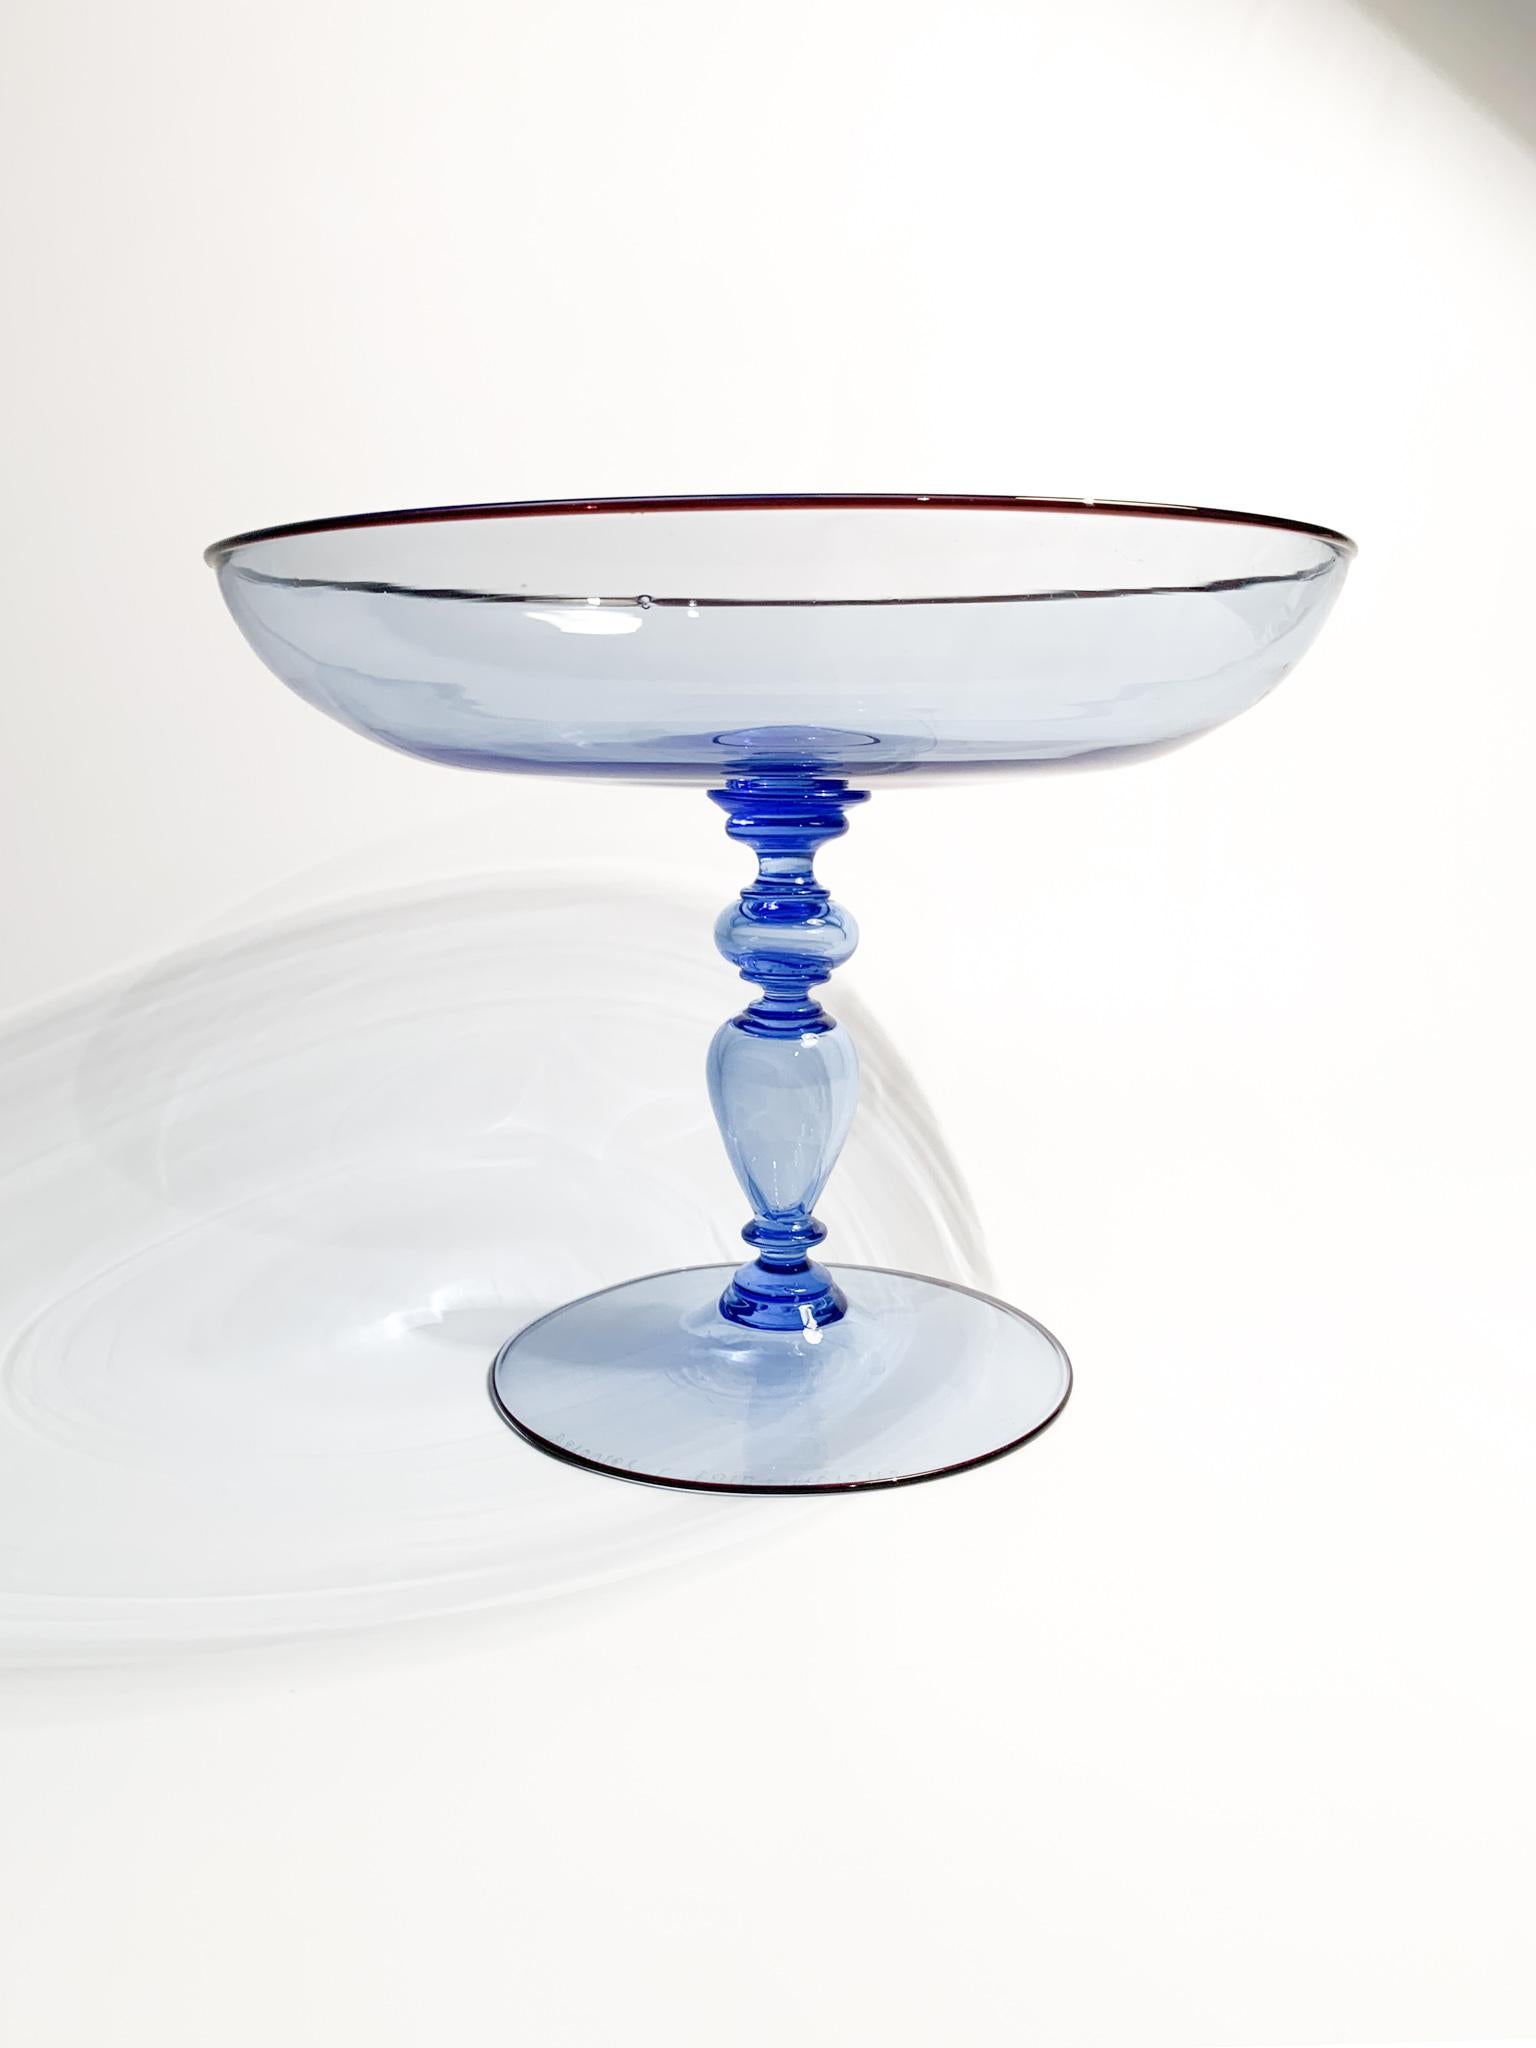 Centerpiece cup in very fine blue Murano glass, made in inspiration of the Caravaggio cup by Barovier and Toso, in the 1980s

Ø 22 cm h 17 cm

Barovier & Toso is a glass factory, known for its handcrafted collections of decorative Murano glass in